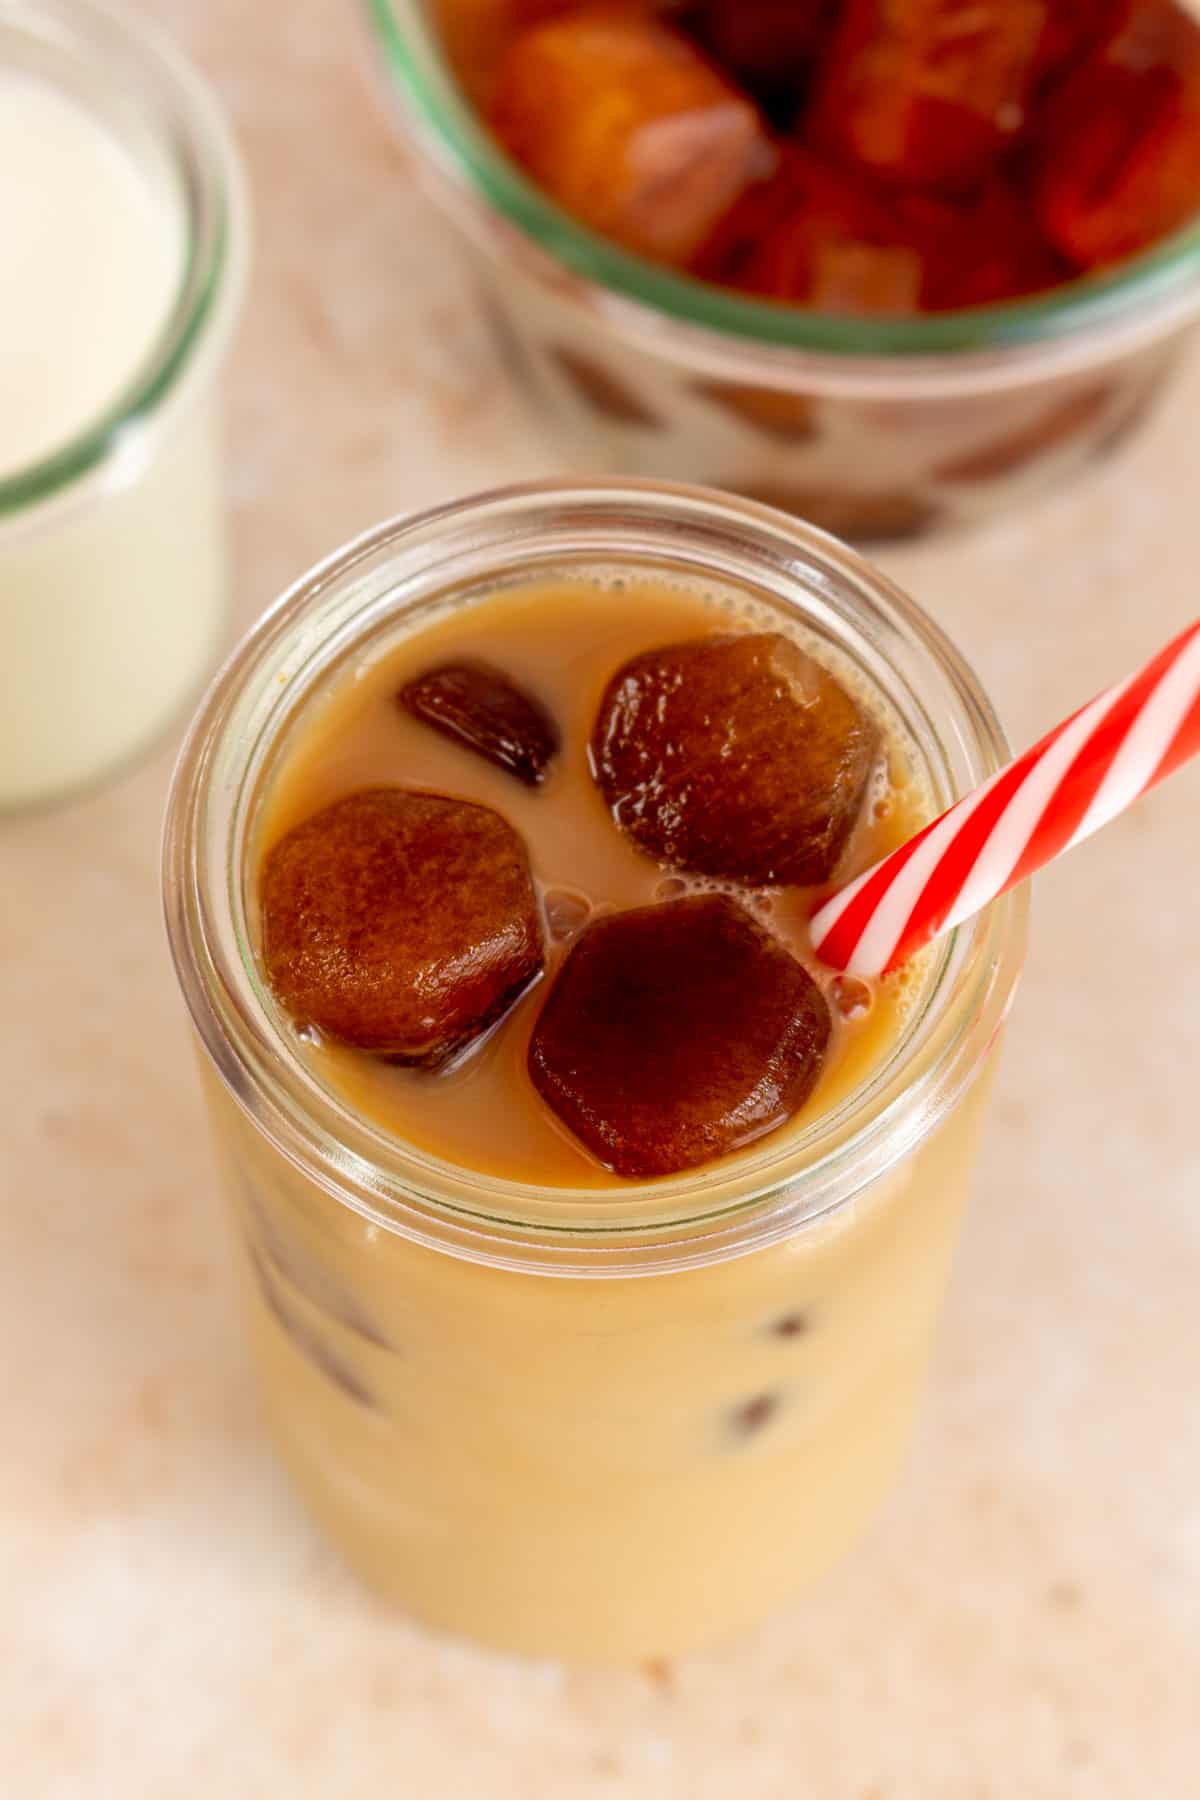 Overhead view of a glass of coffee with coffee ice cubes.